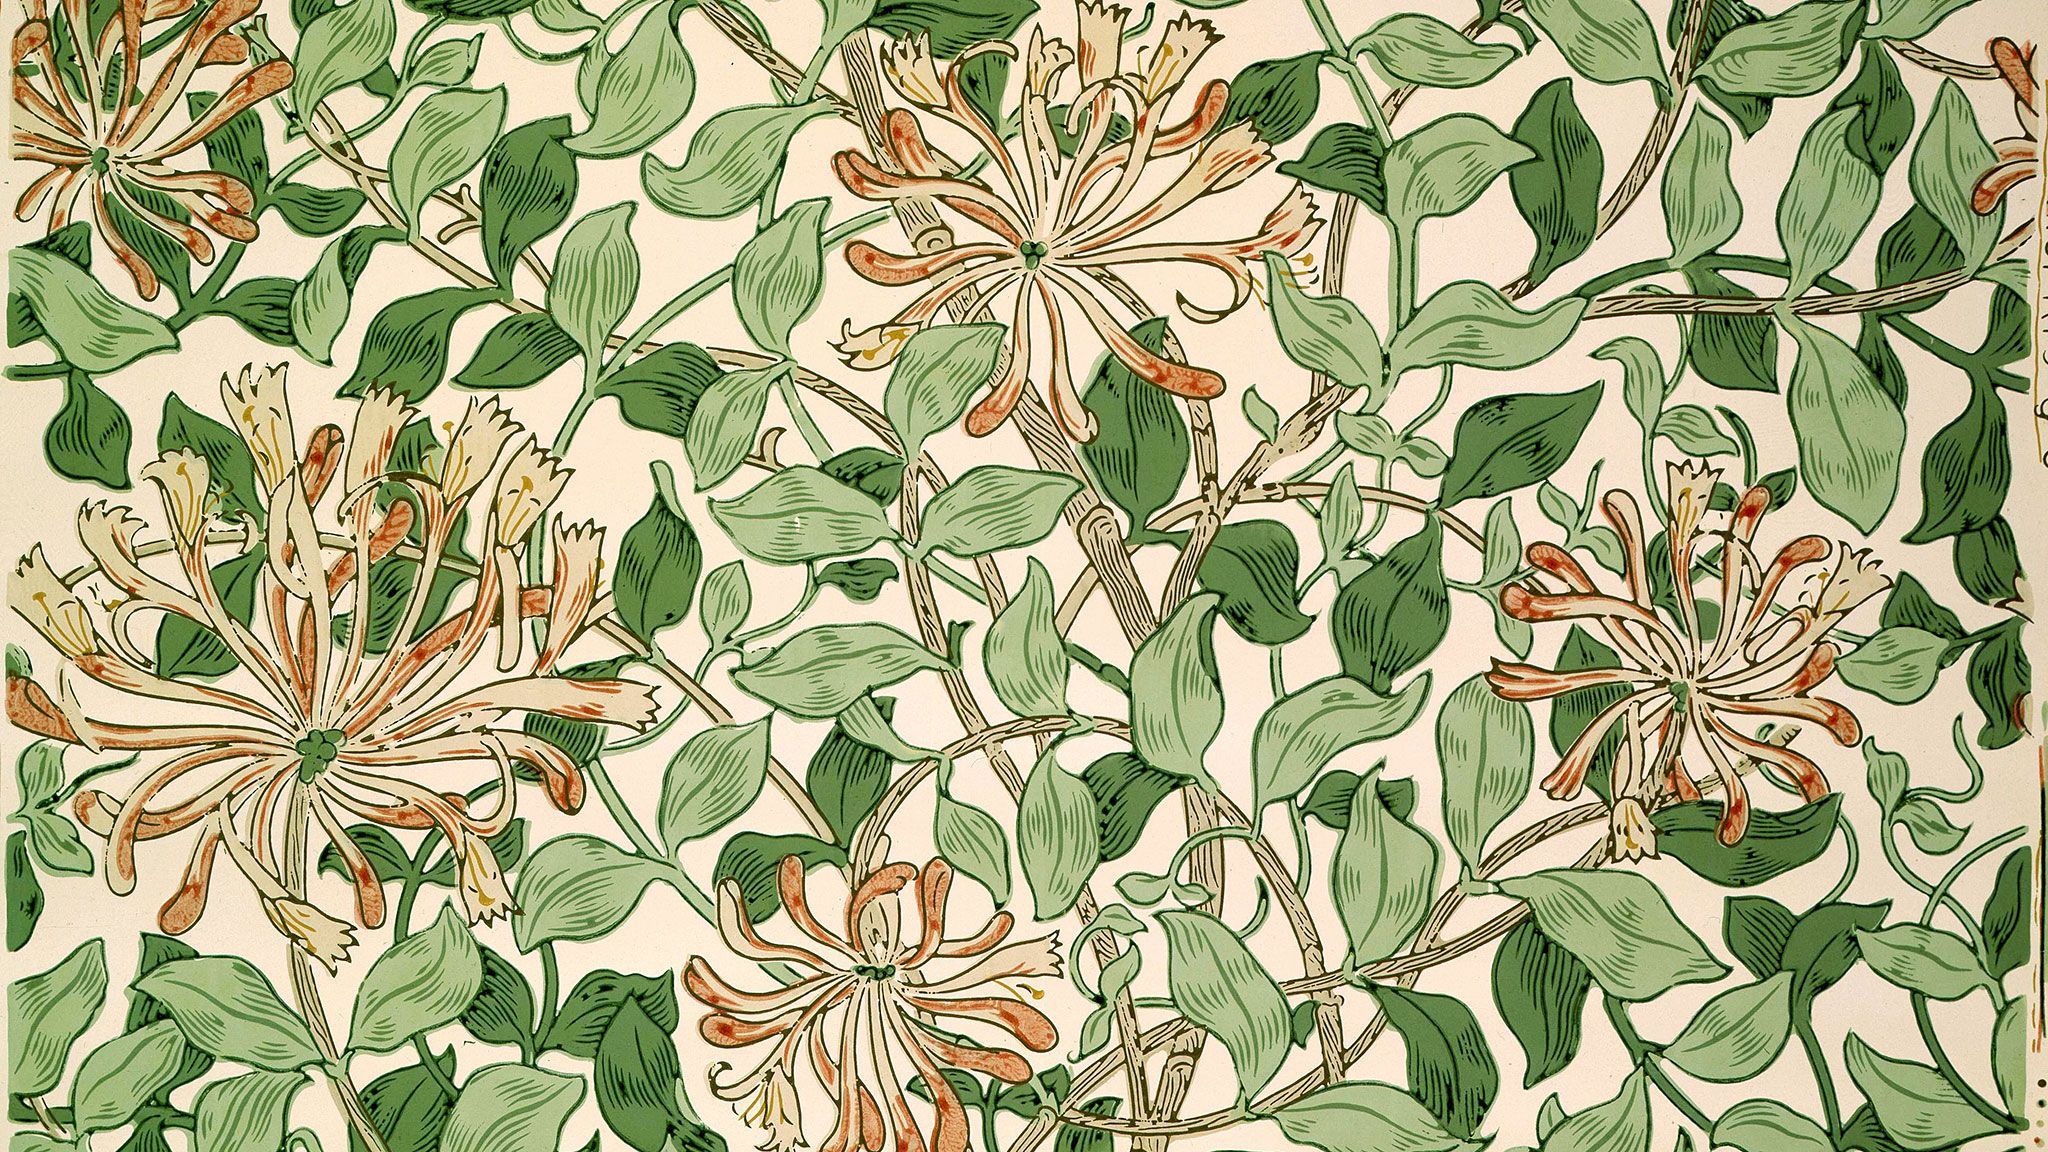 A drawing of flowers and leaves on paper - Cottagecore